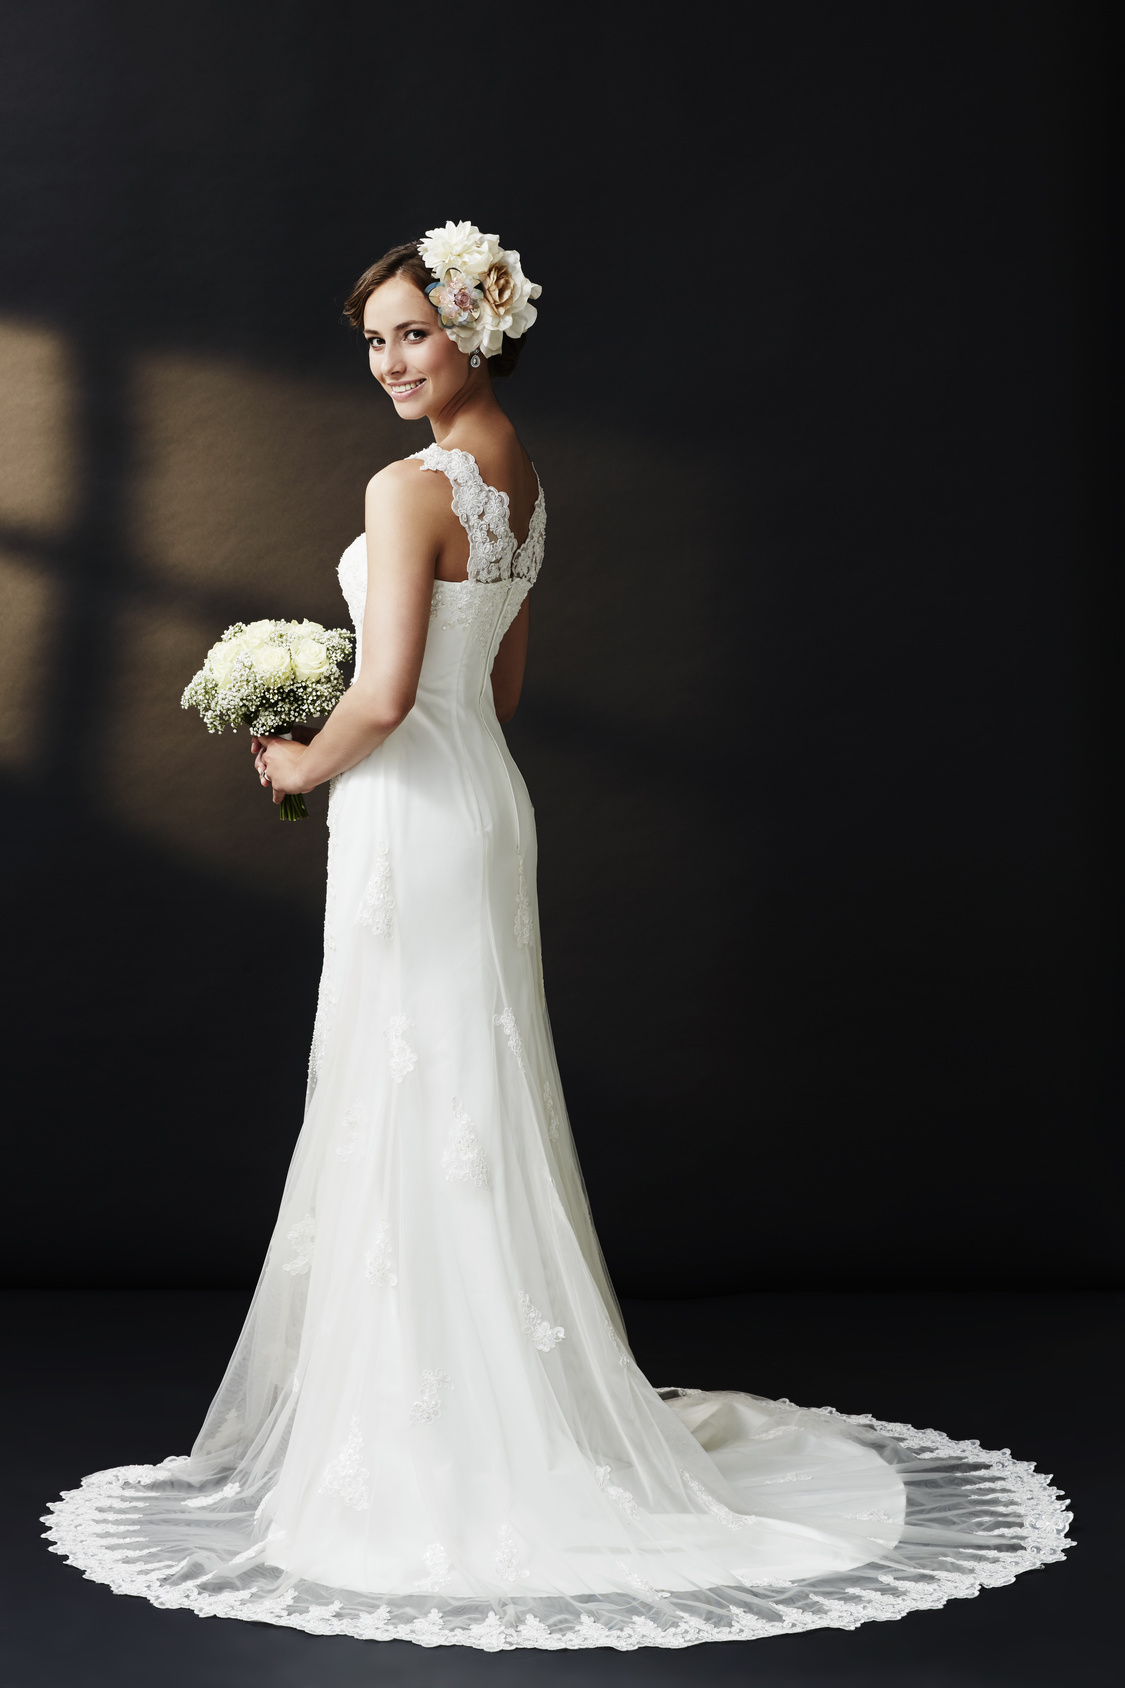 Glamorous young bride in wedding dress, smiling.